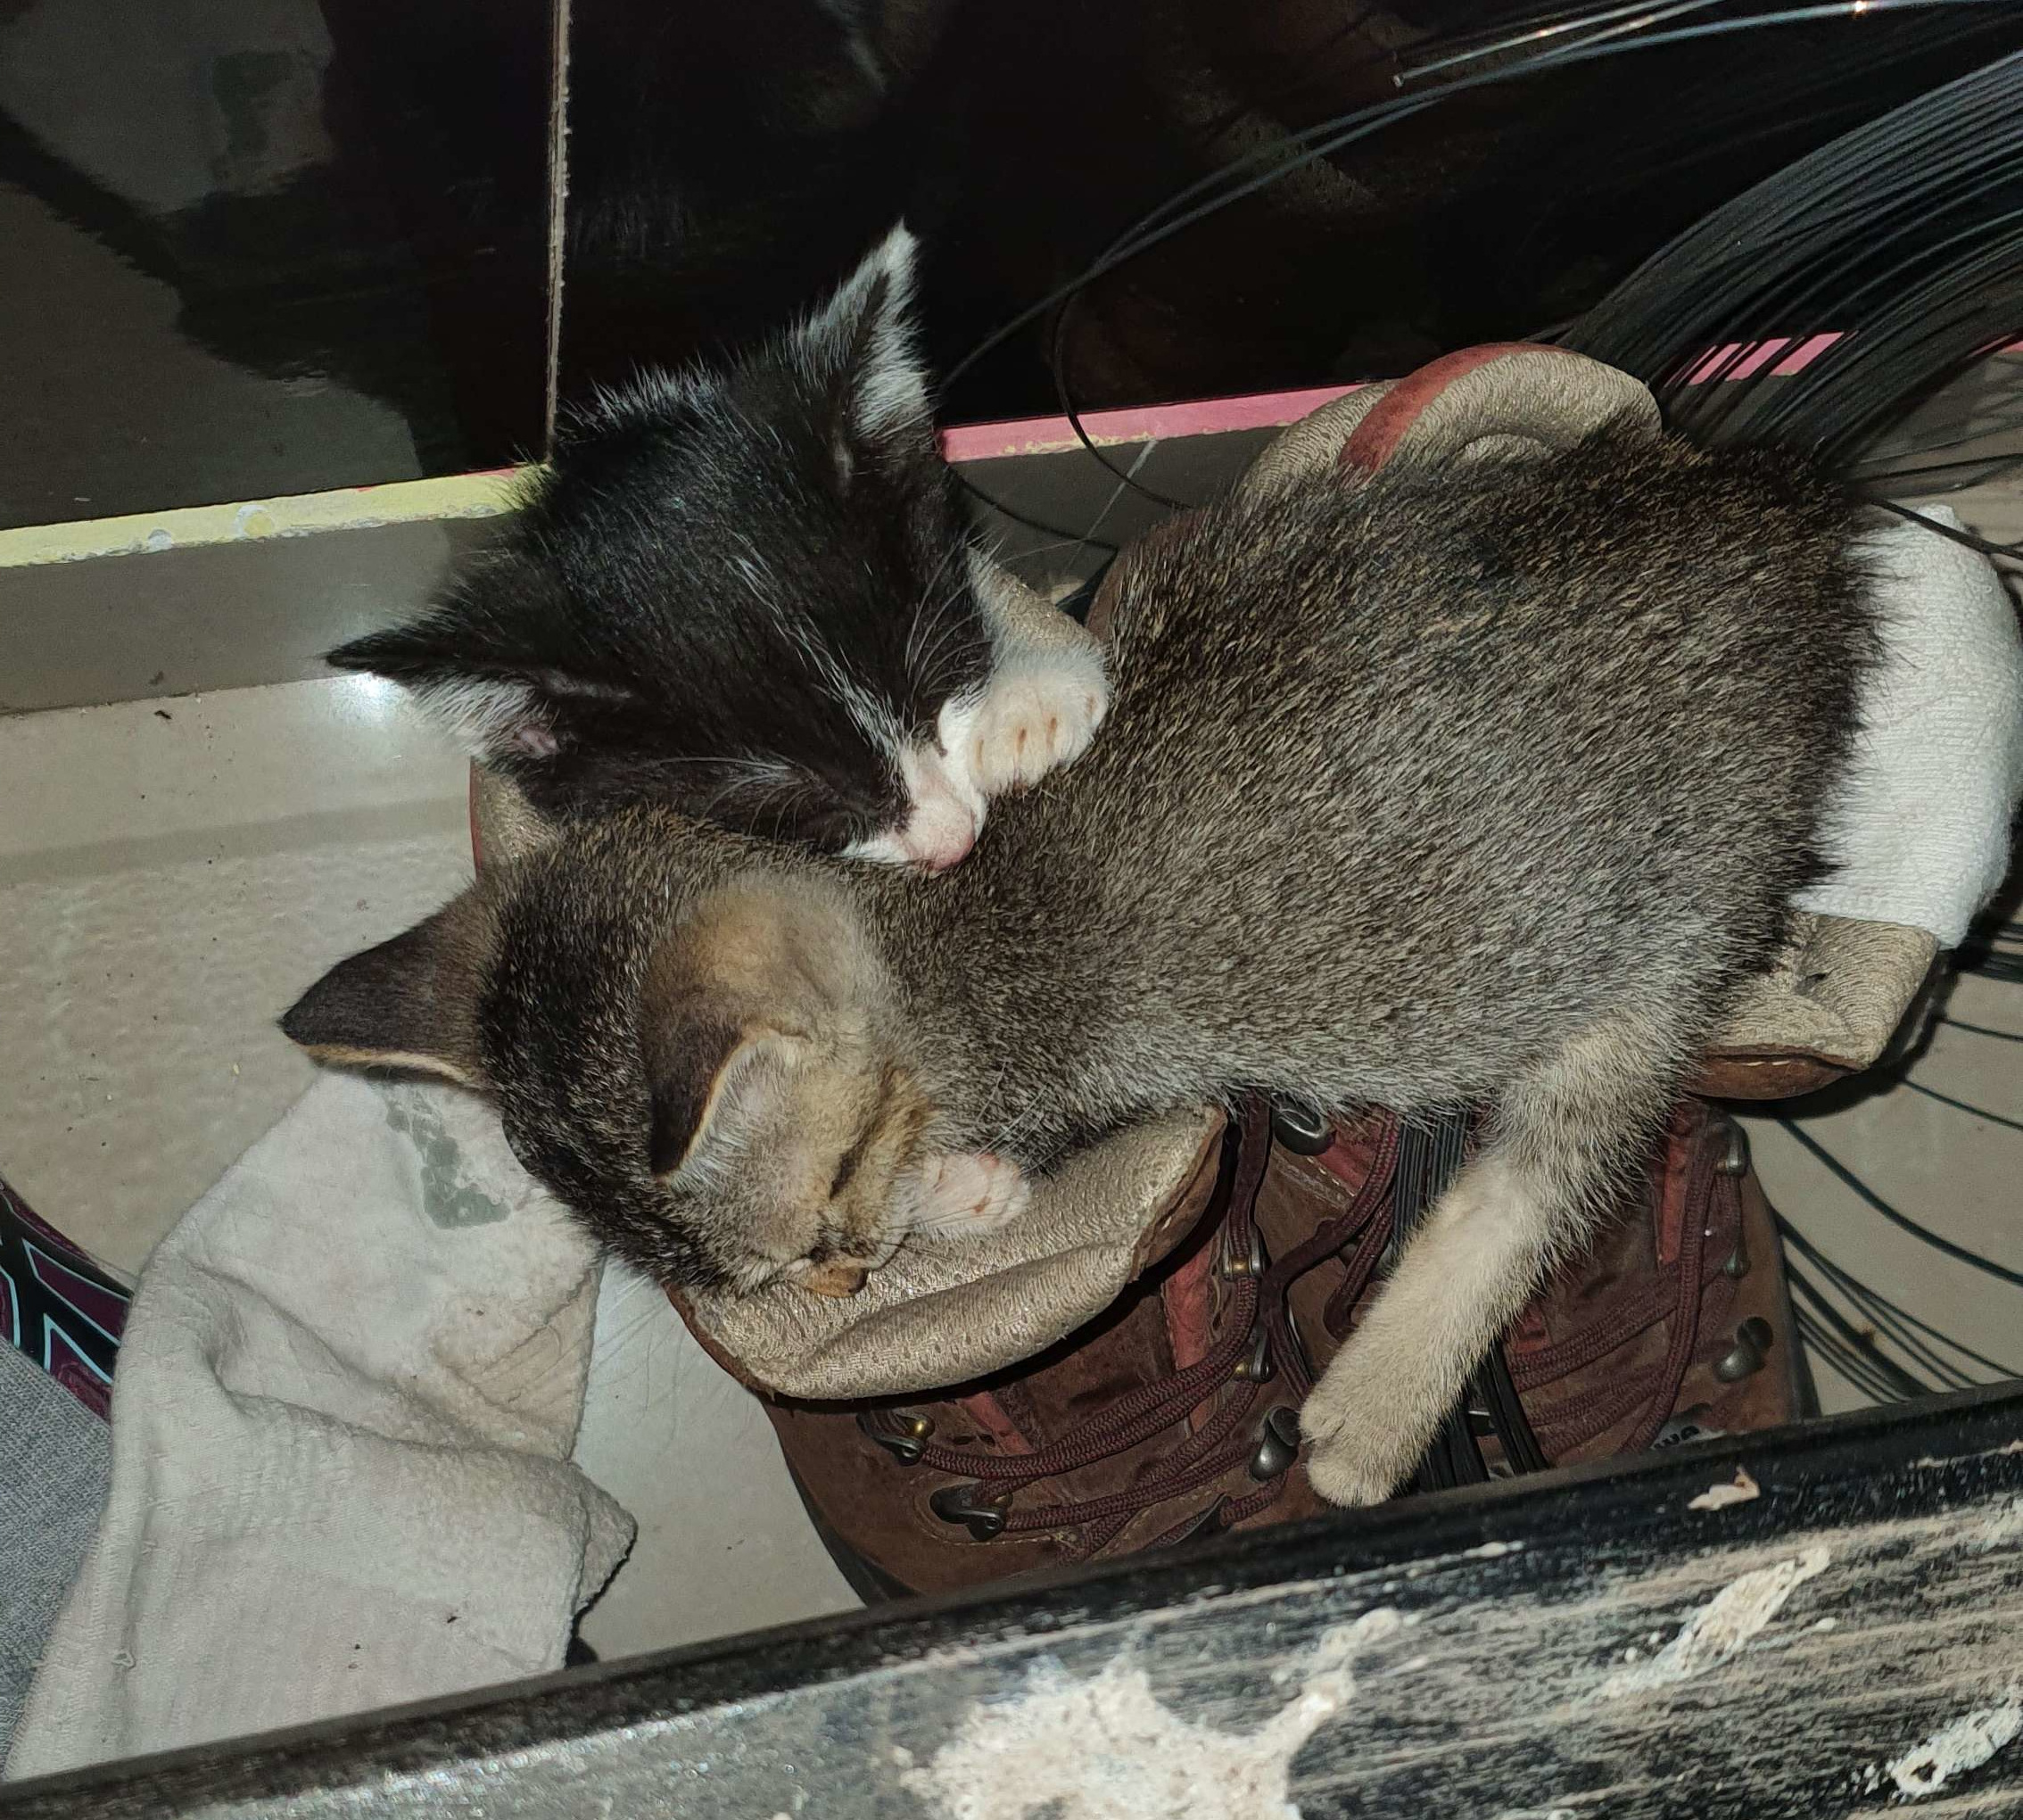 Kittens convert one of the researcher's shoes into a comfy bed. Photo: SN Marliana.